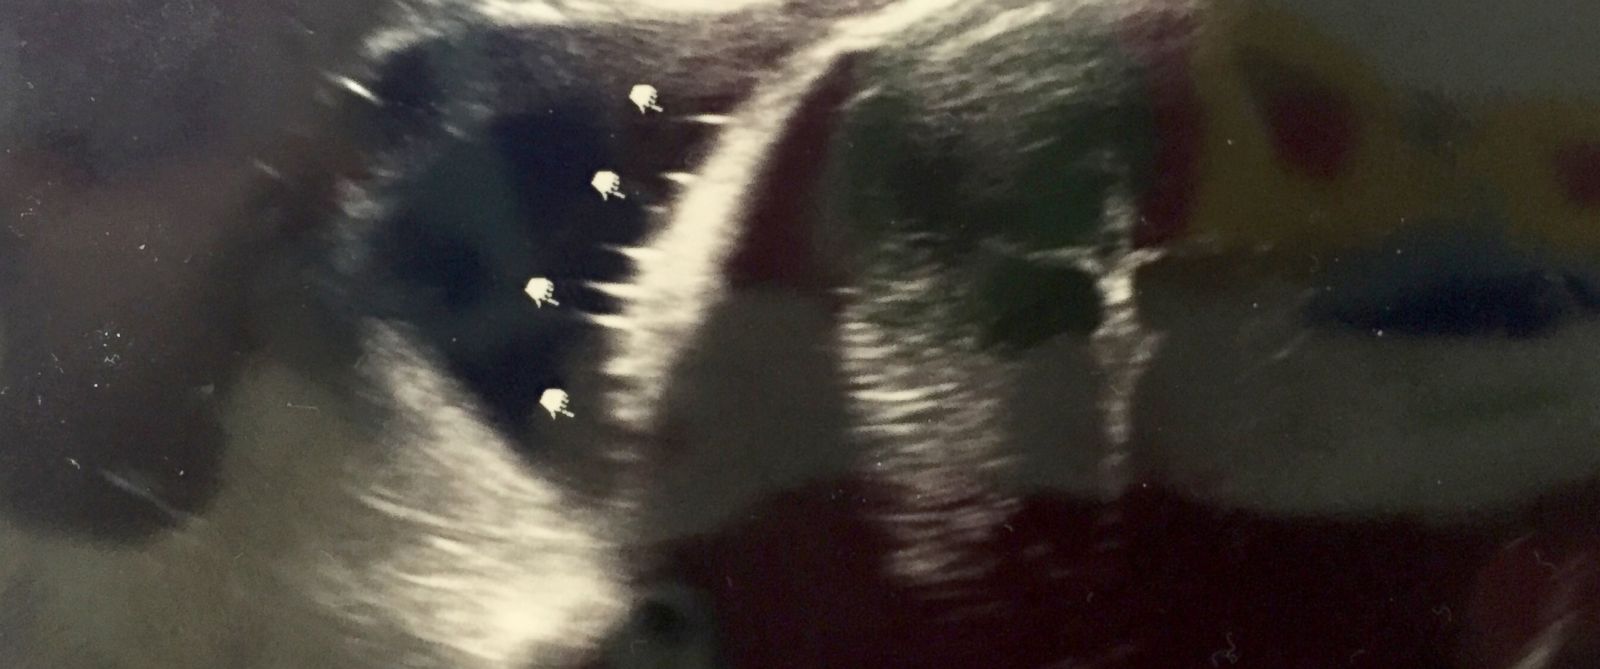 Mom Shocked After Noticing What Appears to Be a Crucifix in Sonogram